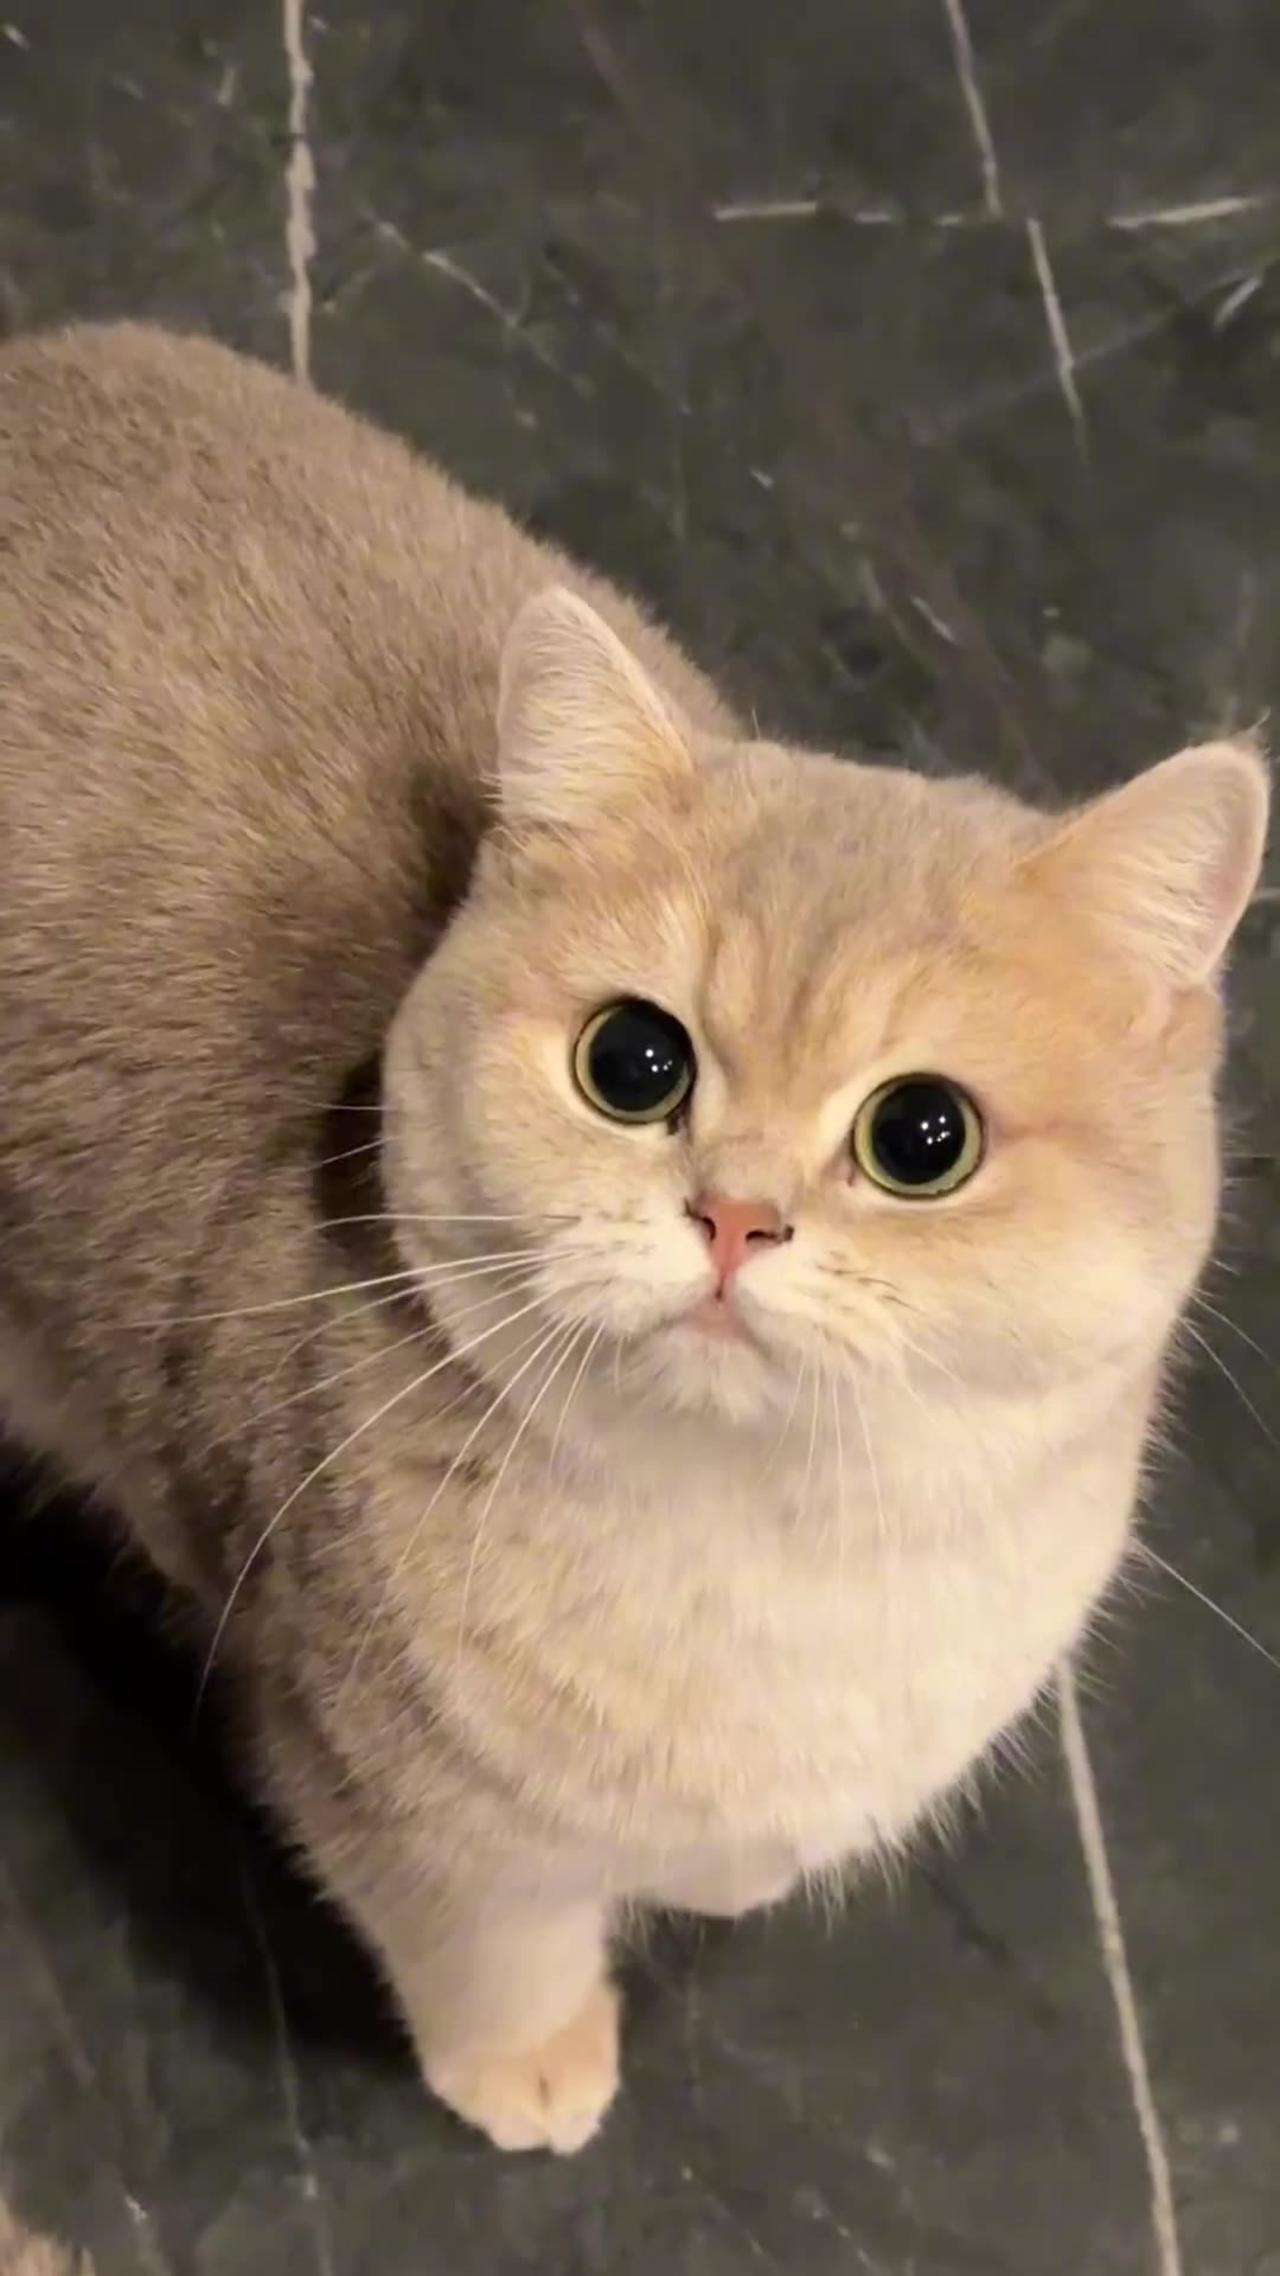 Anyone else obsessed with watching those cute little kittens meow? It's just too precious！🥰